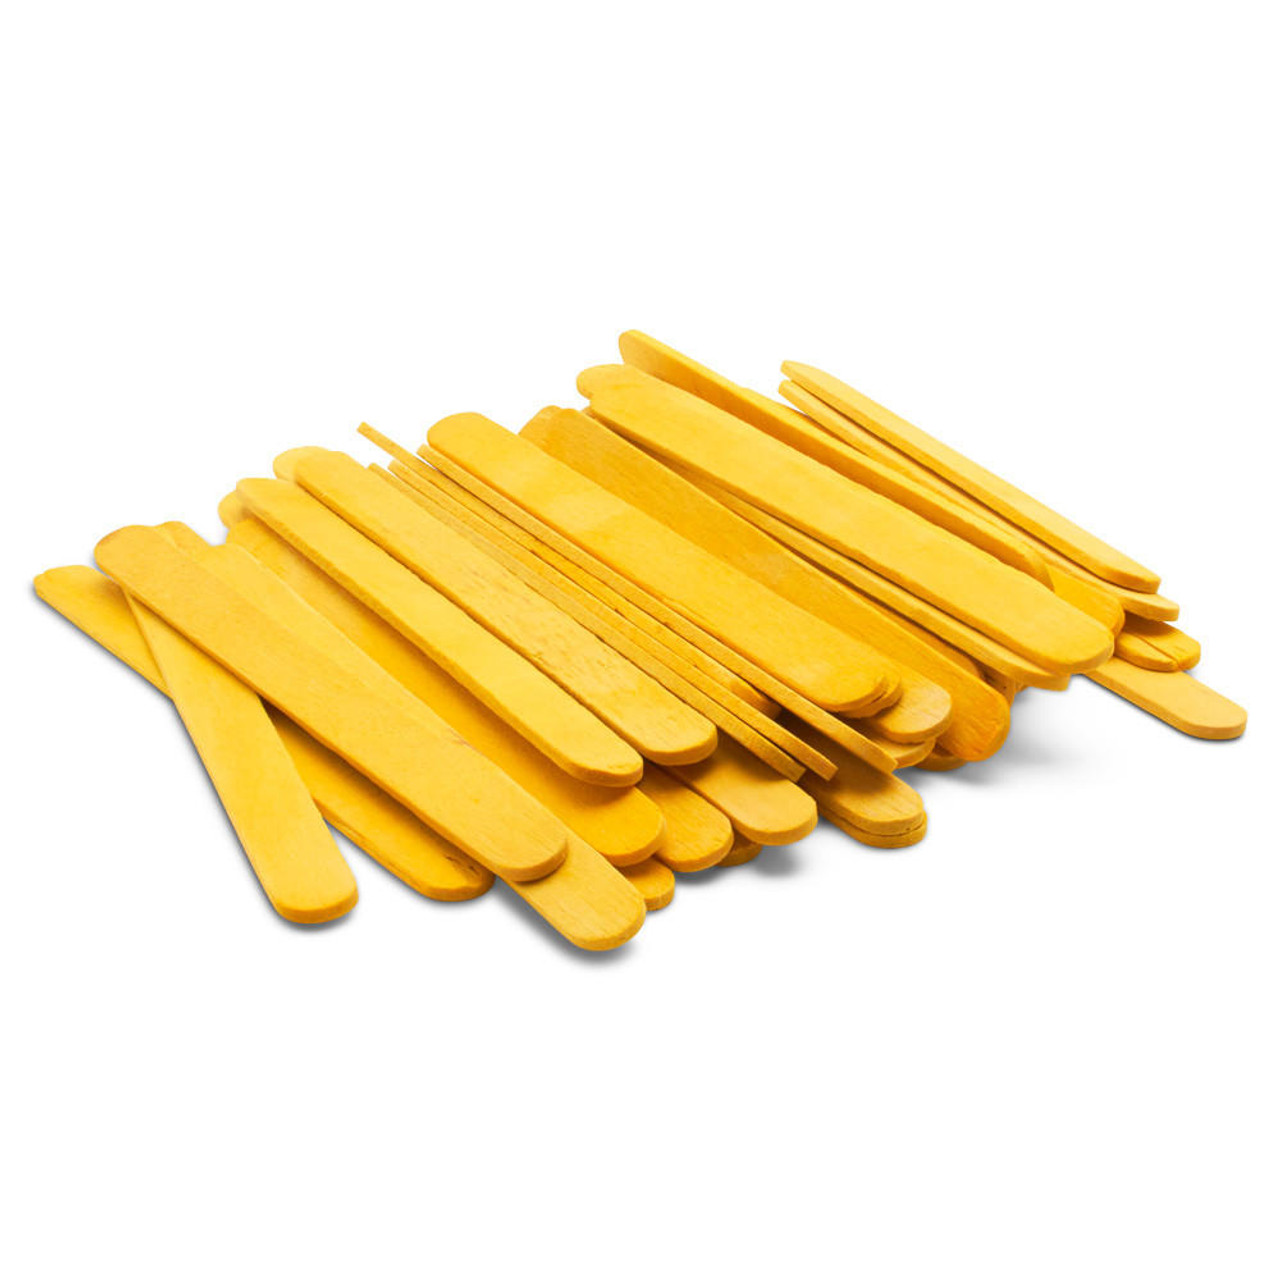 4-1/2 Yellow Wooden Popsicle Sticks, Pack Of 100